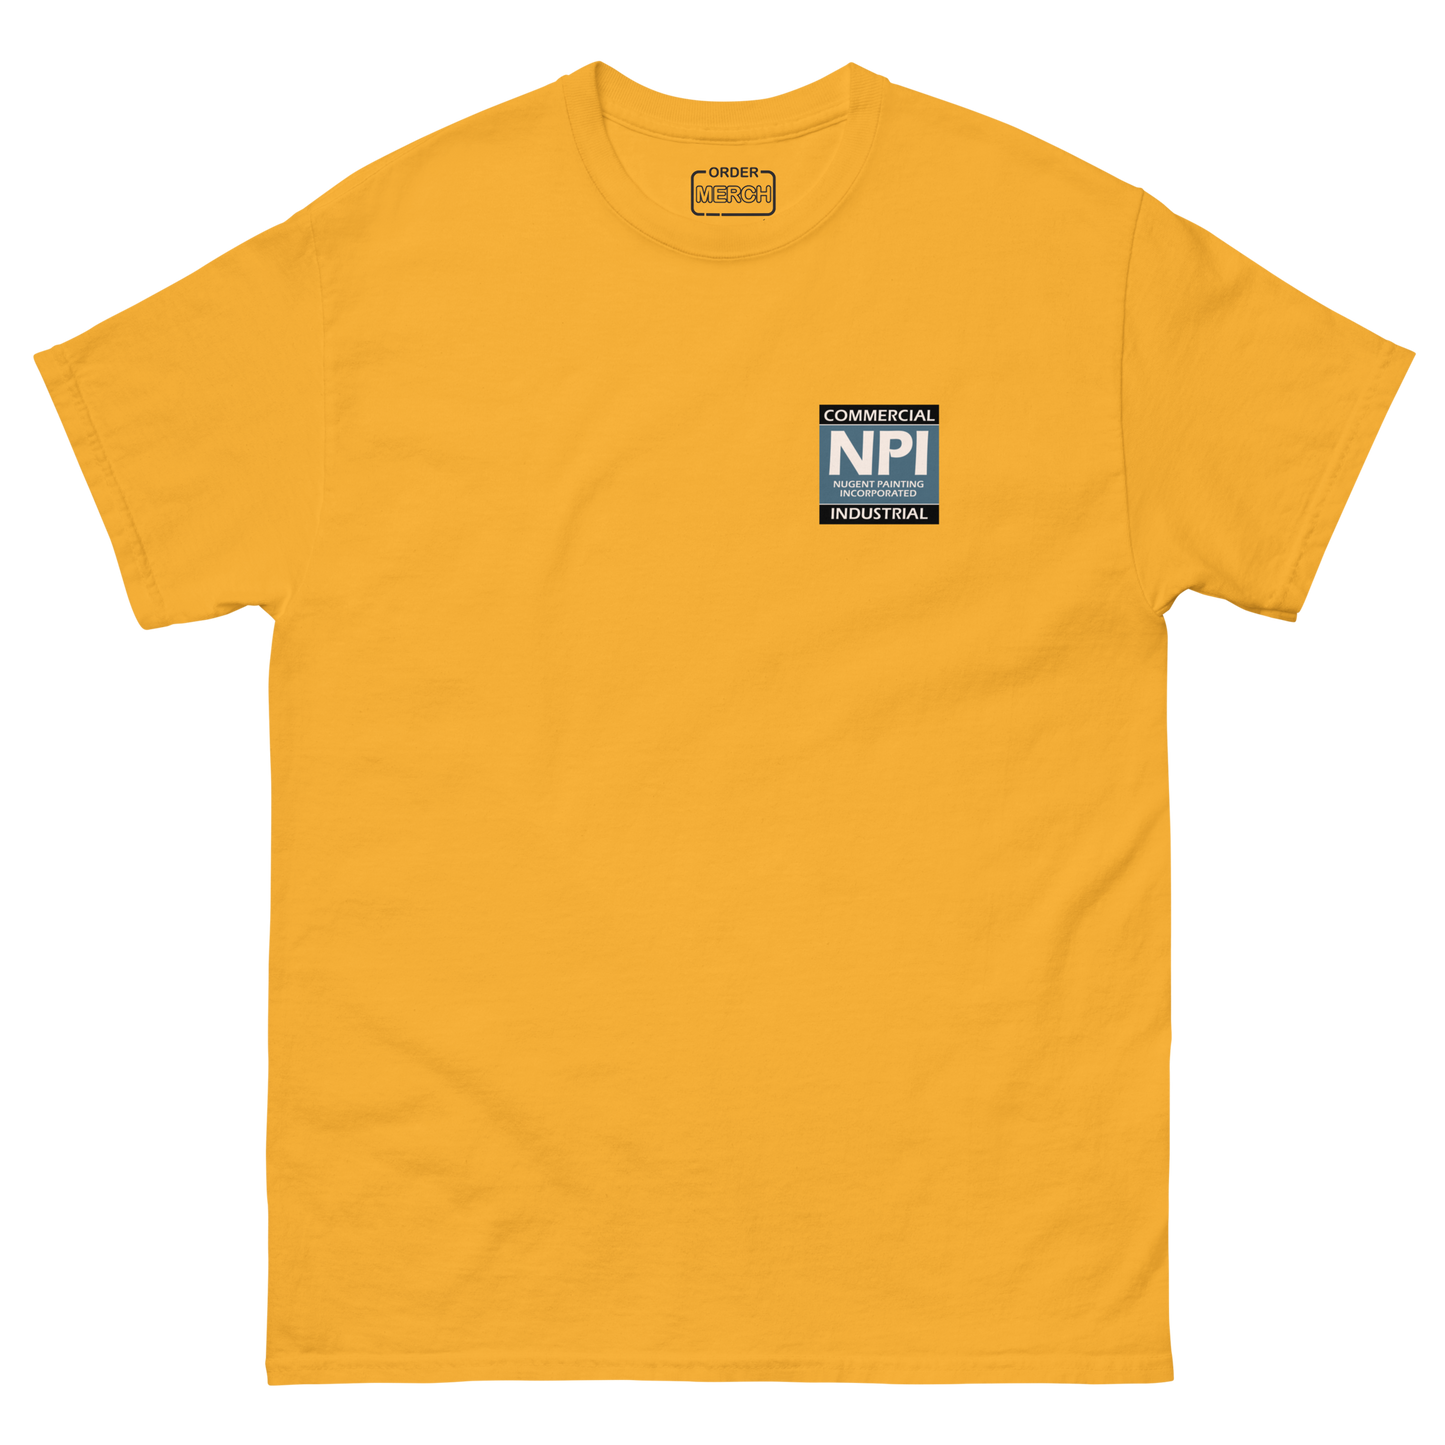 NPI STAPLE FRONT ONLY - UNISEX classic tee